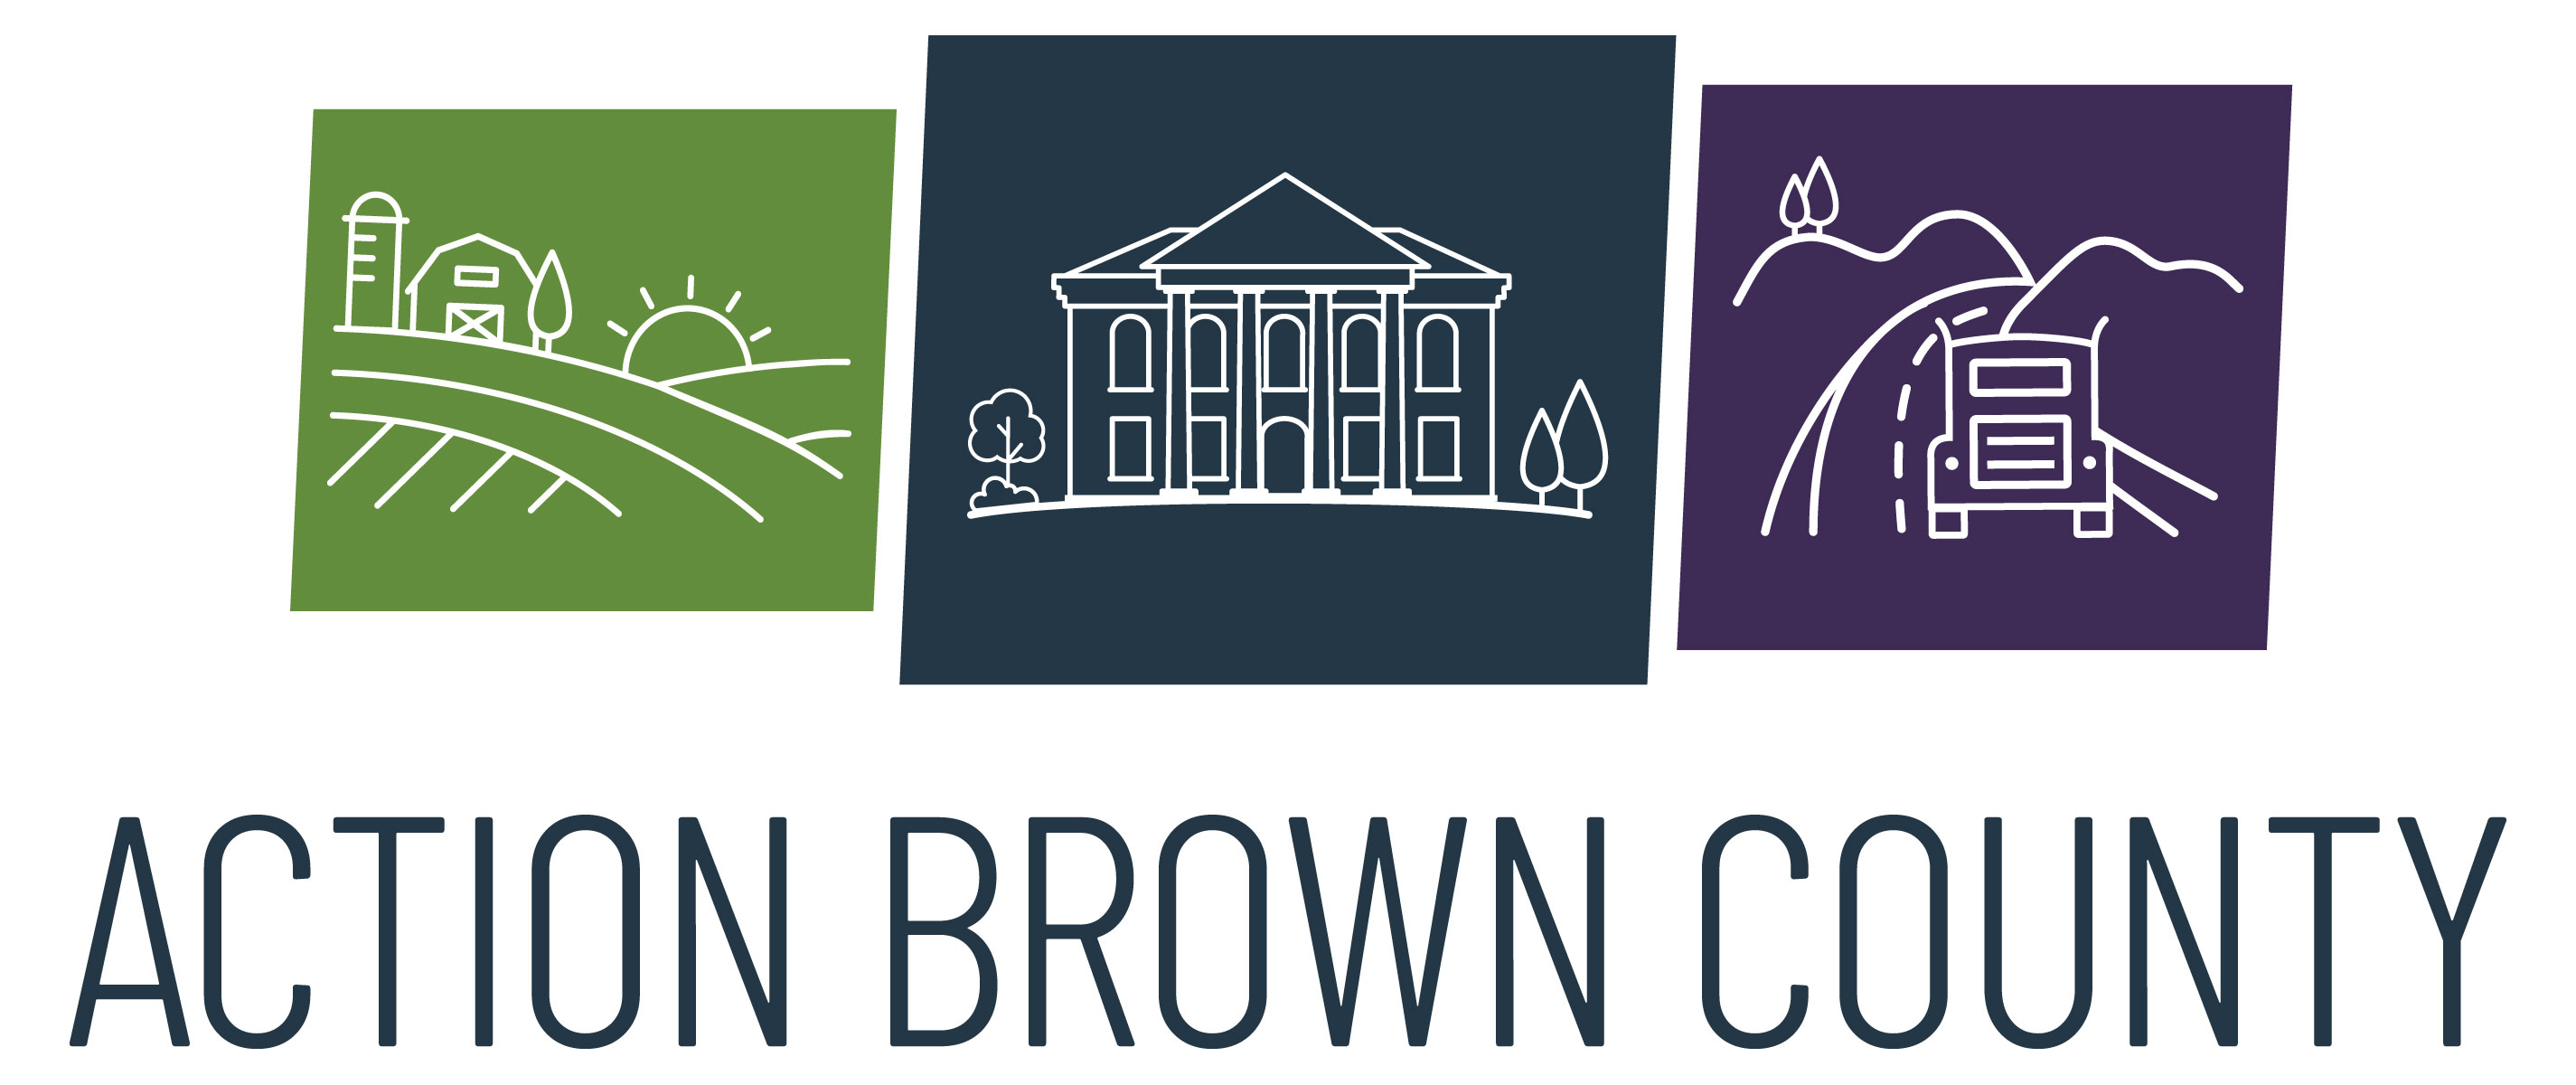 Action Brown County logo